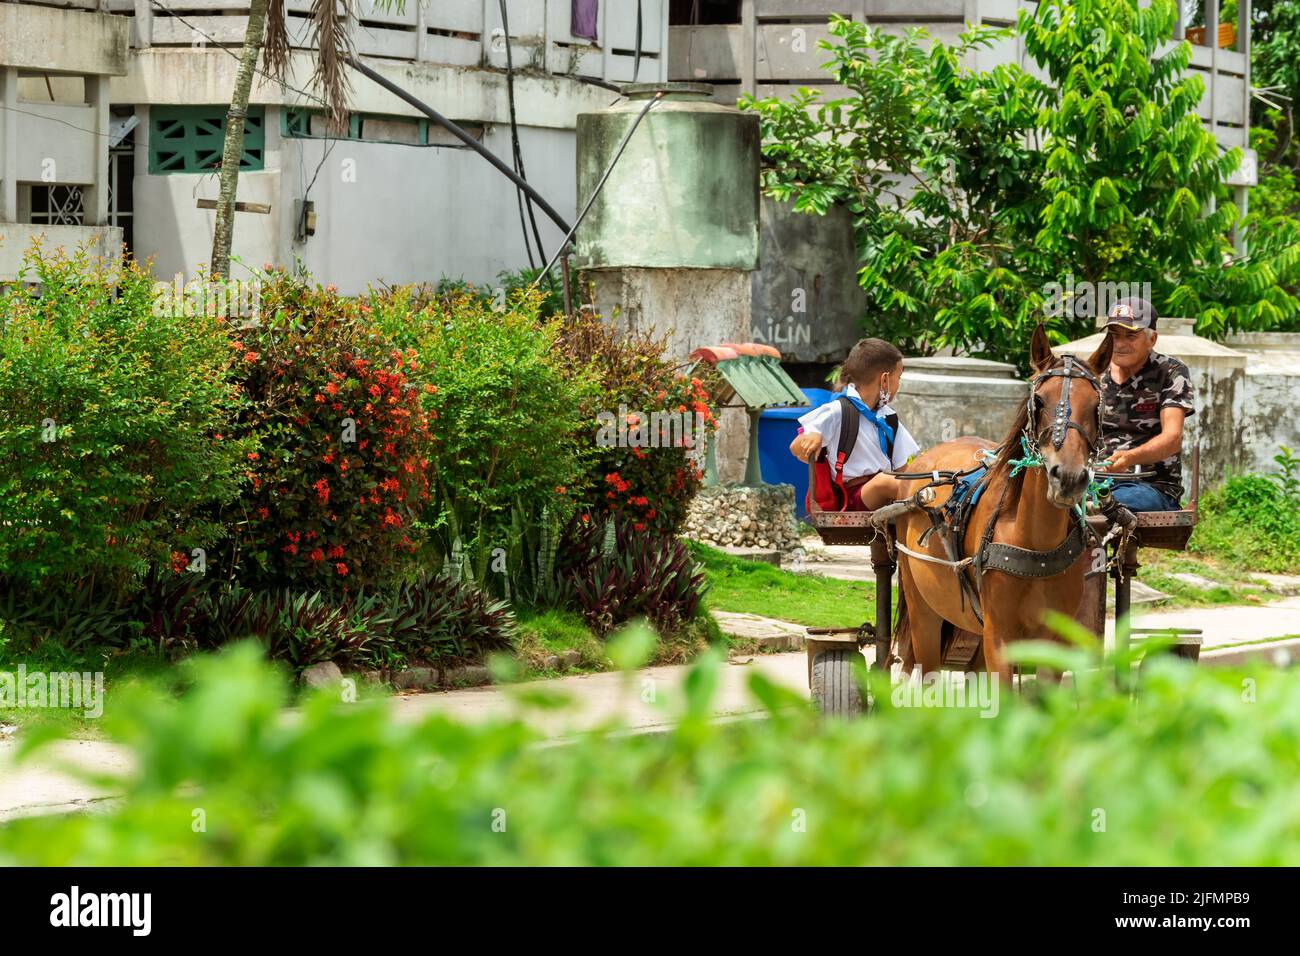 Draft horse tied up to and pulling a handmade vehicle, carrying an elderly man and a child who is wearing a Cuban school uniform. There is foliage in Stock Photo